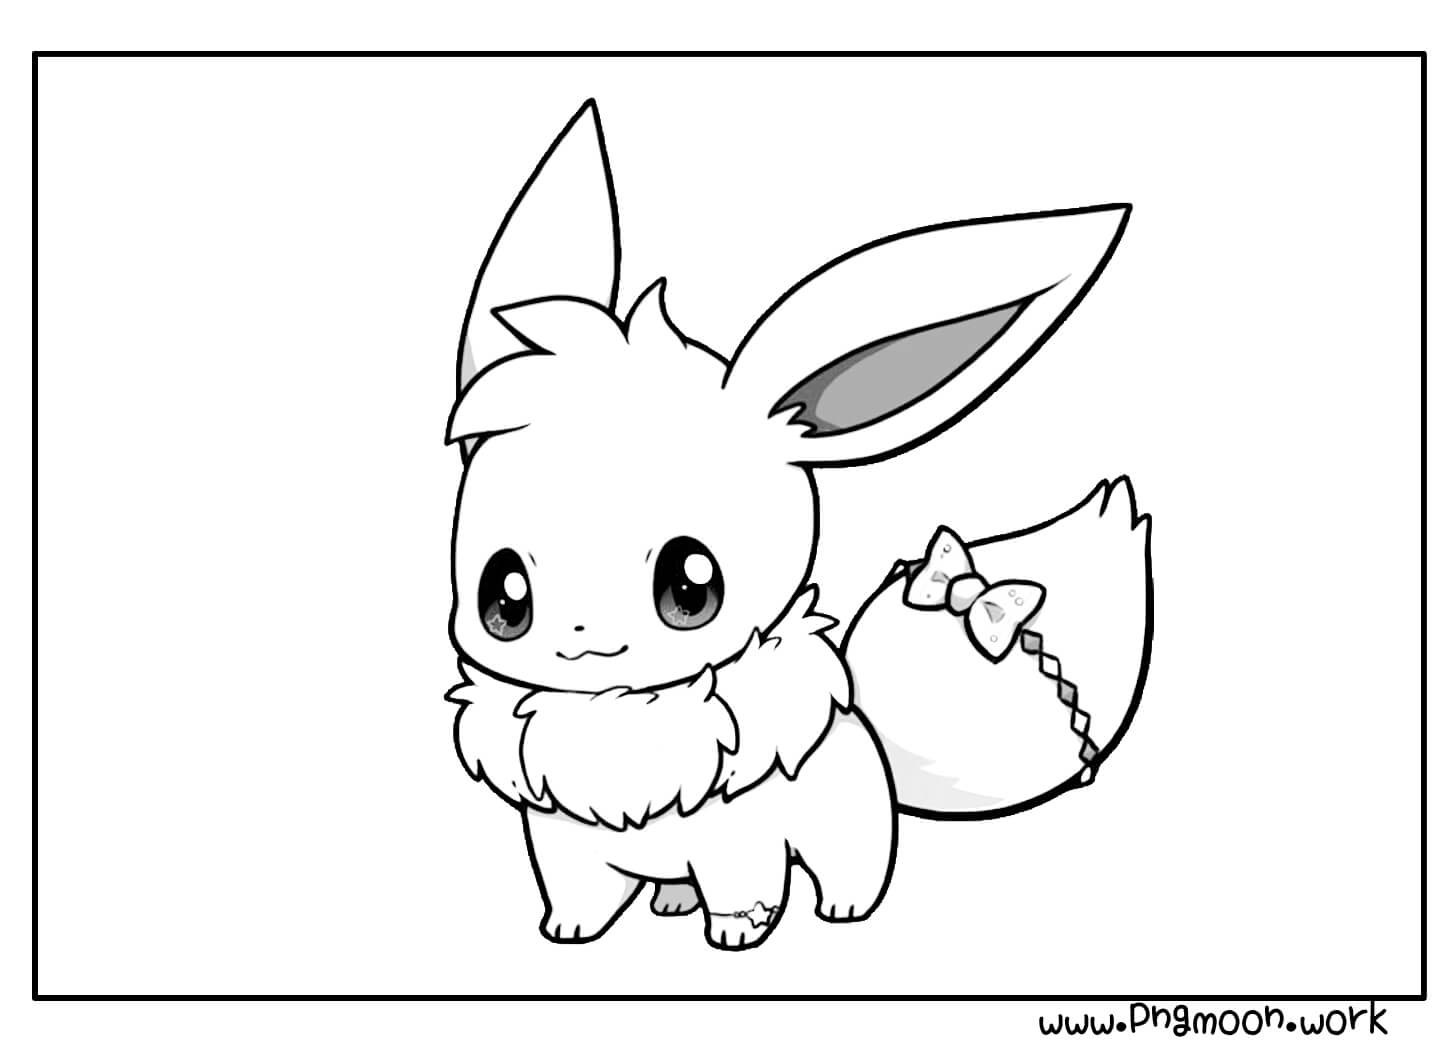 Eevee Pokemon Coloring Pages Pngmoon Png Images Coloring Pages